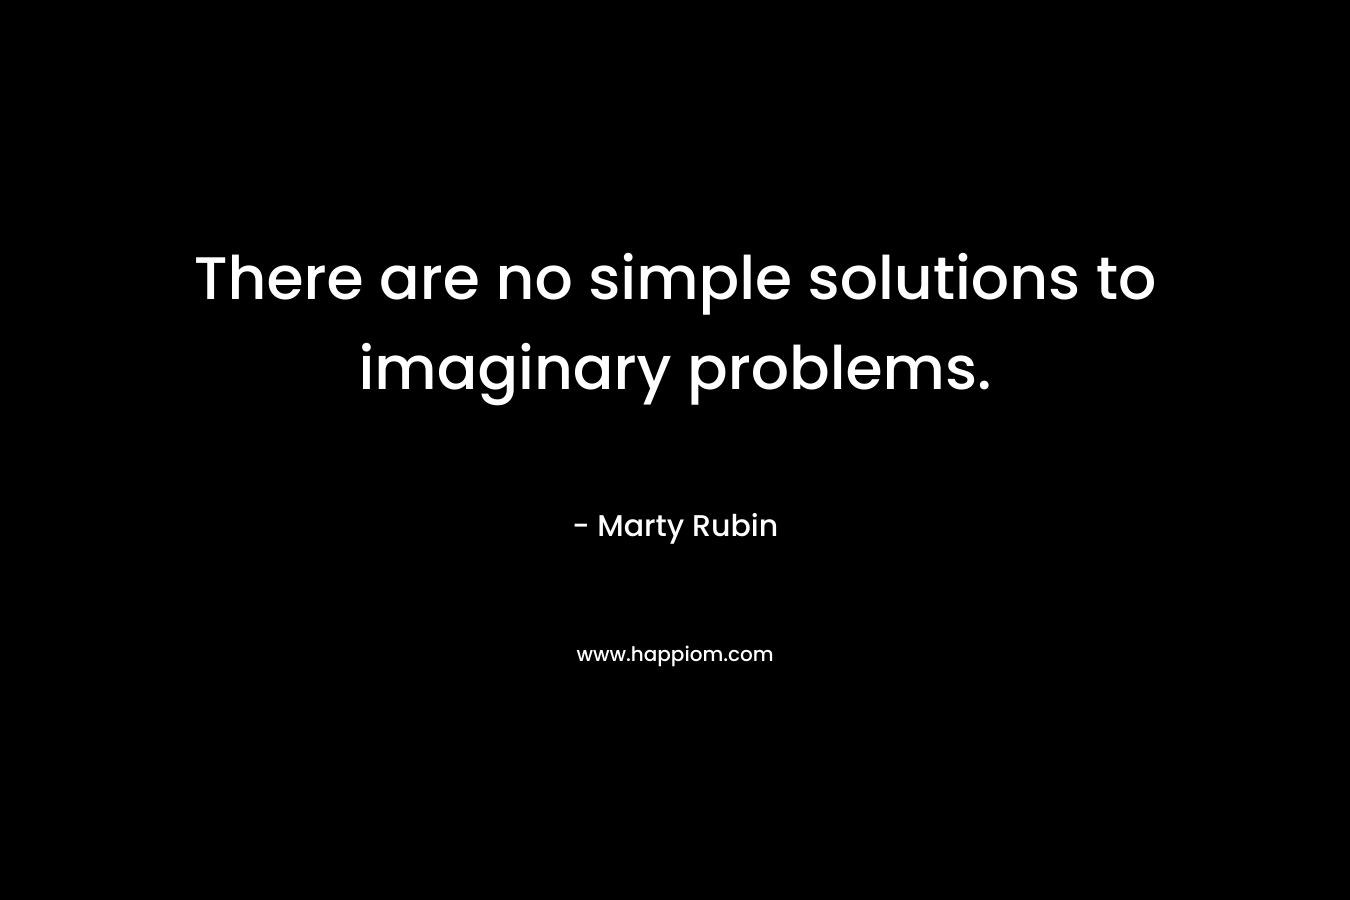 There are no simple solutions to imaginary problems. – Marty Rubin